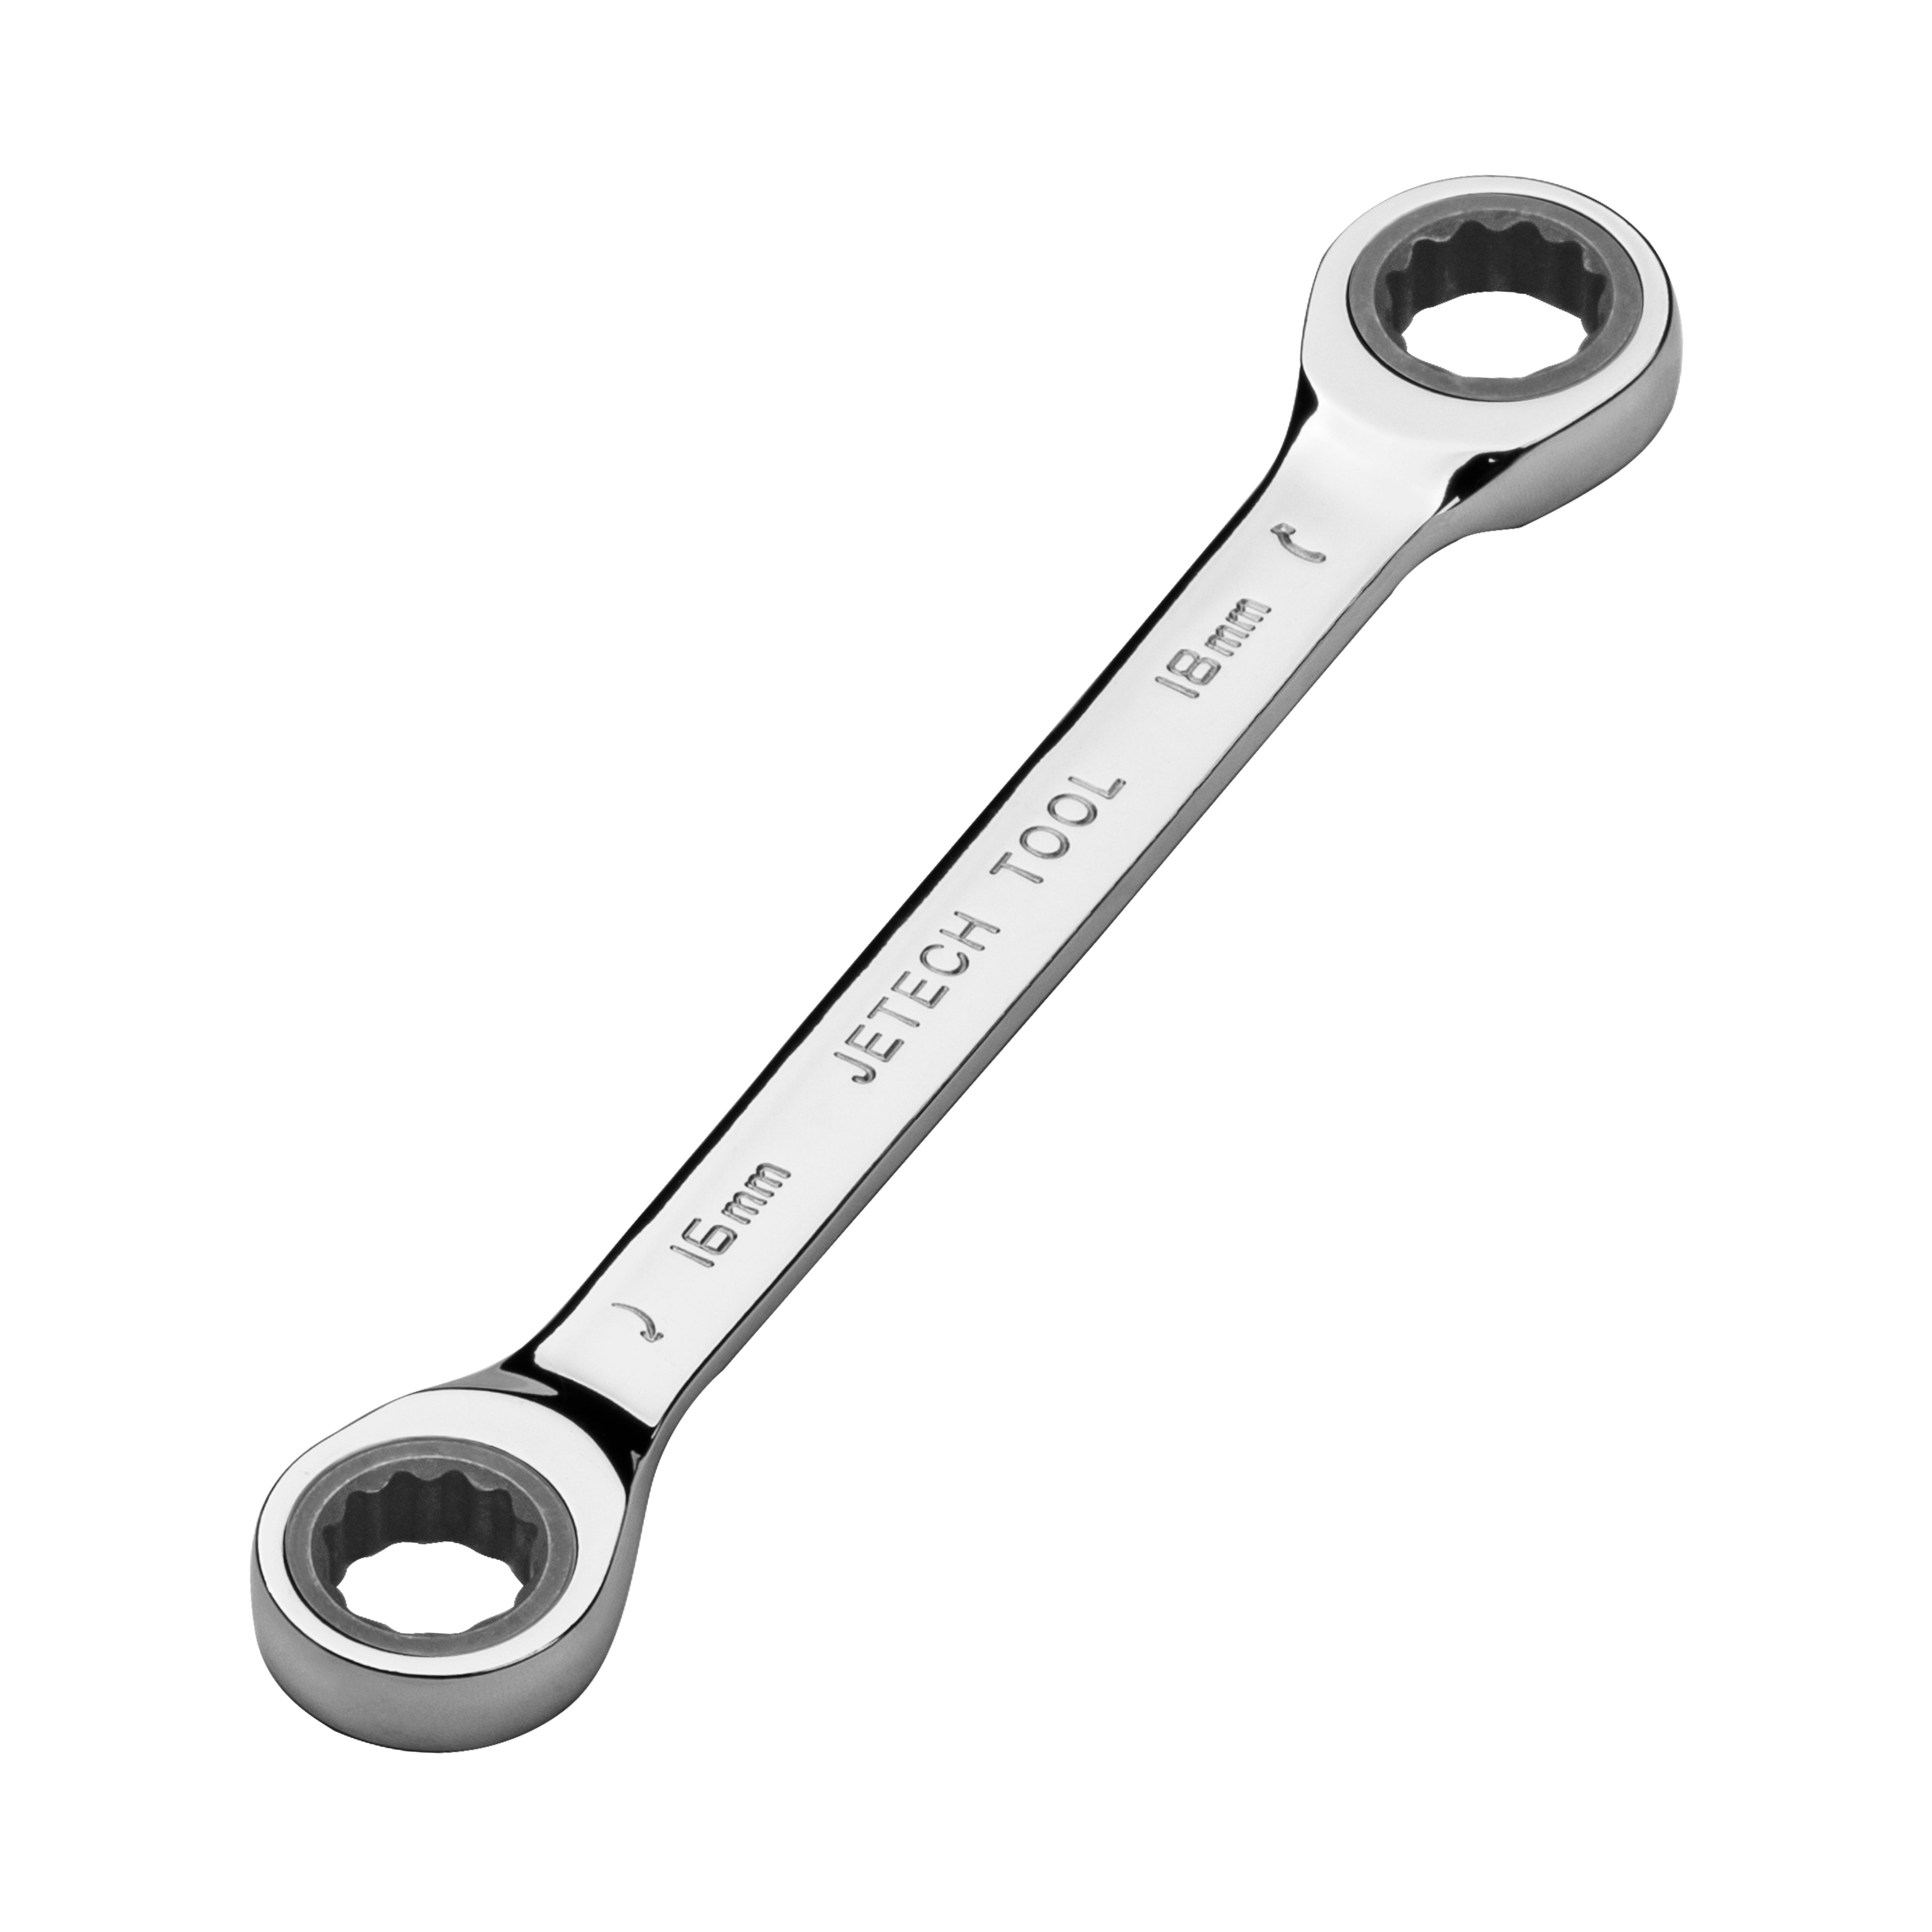 Jetech Double Box End Ratcheting Wrench (16mm x 18mm), Metric